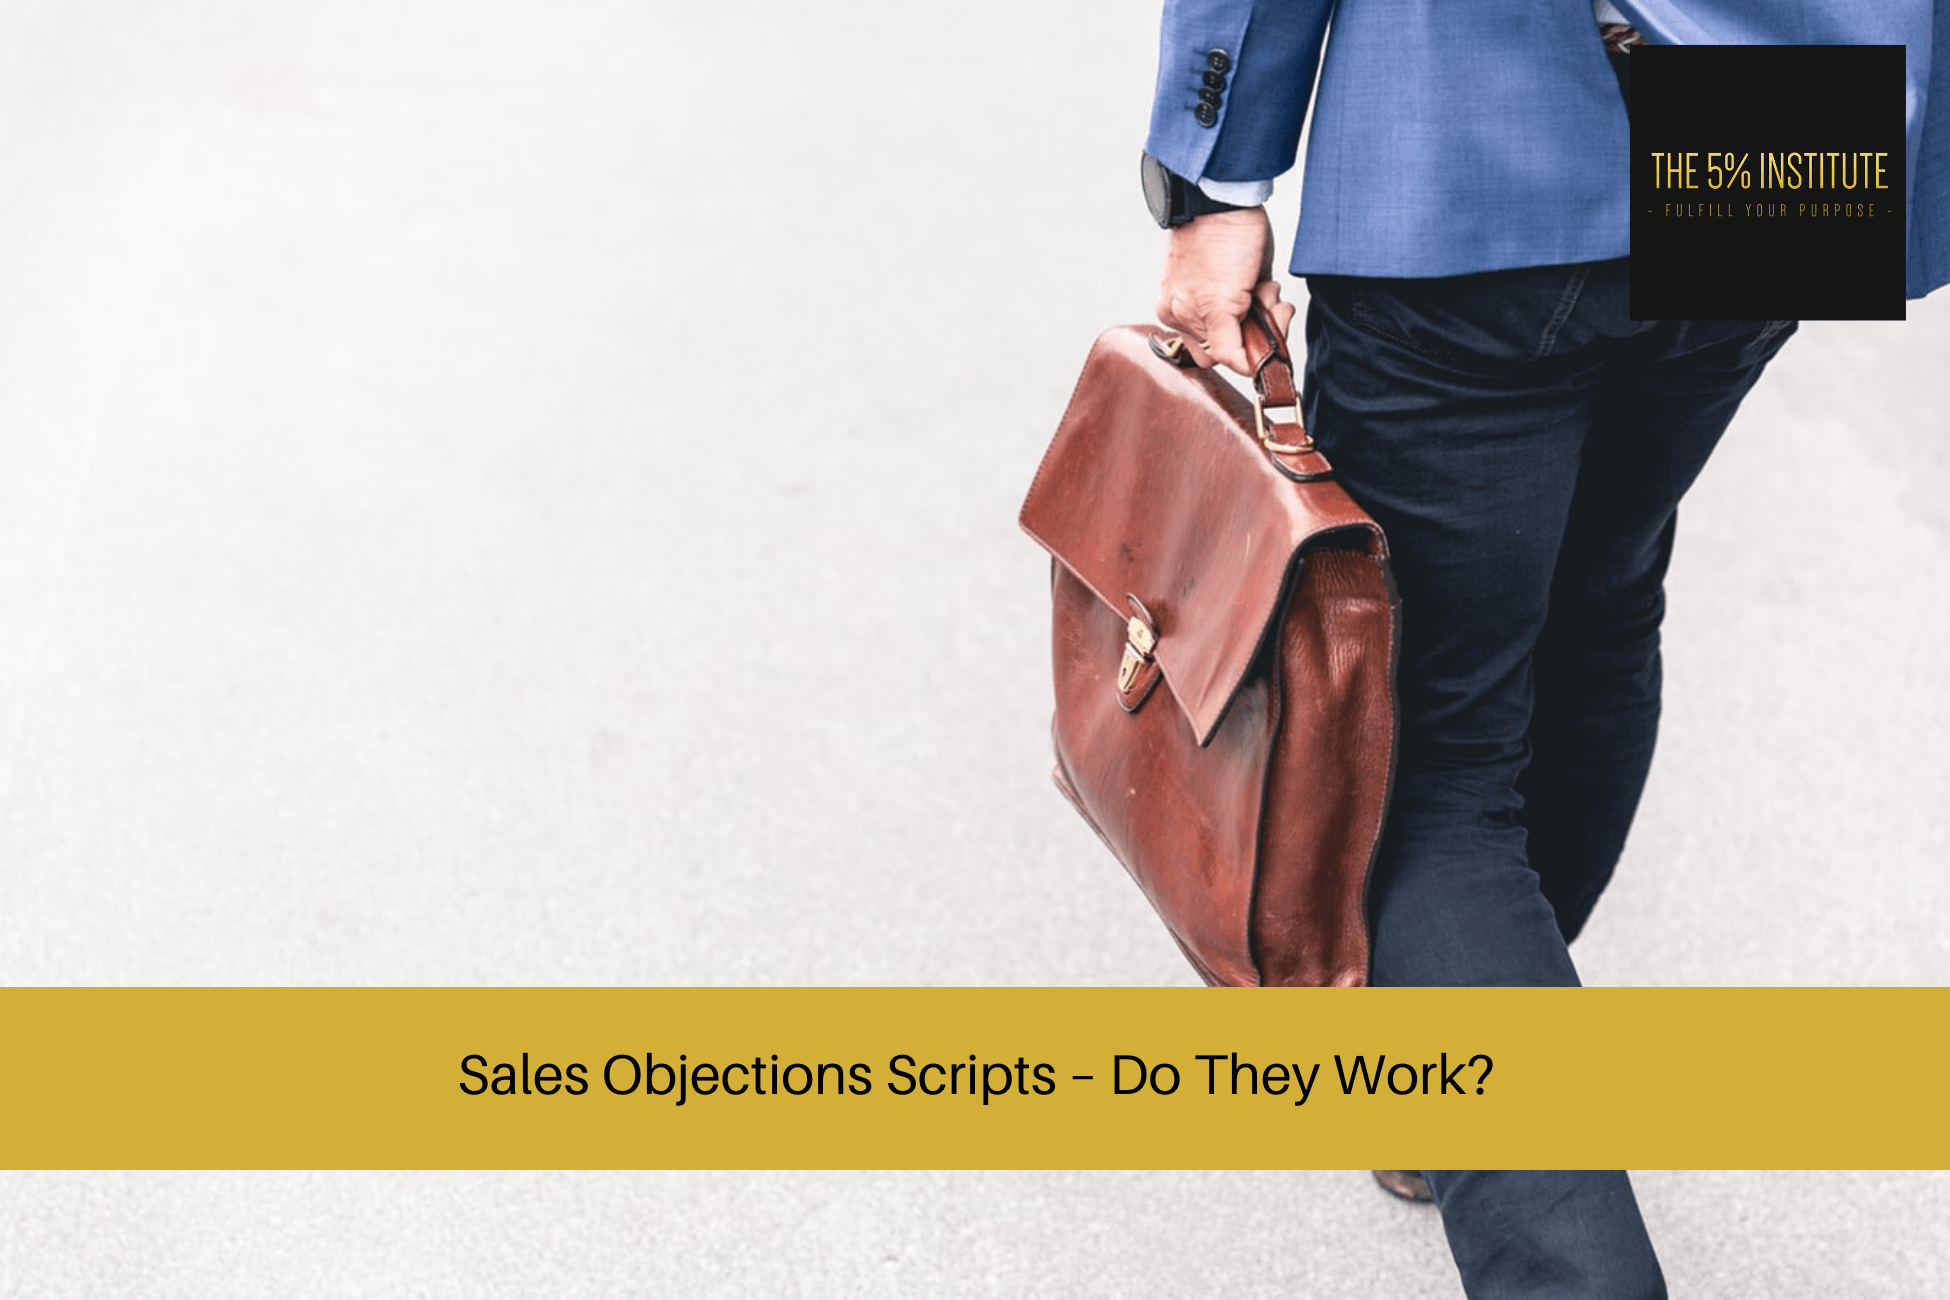 Sales Objections Scripts Do They Work? The 5% Institute